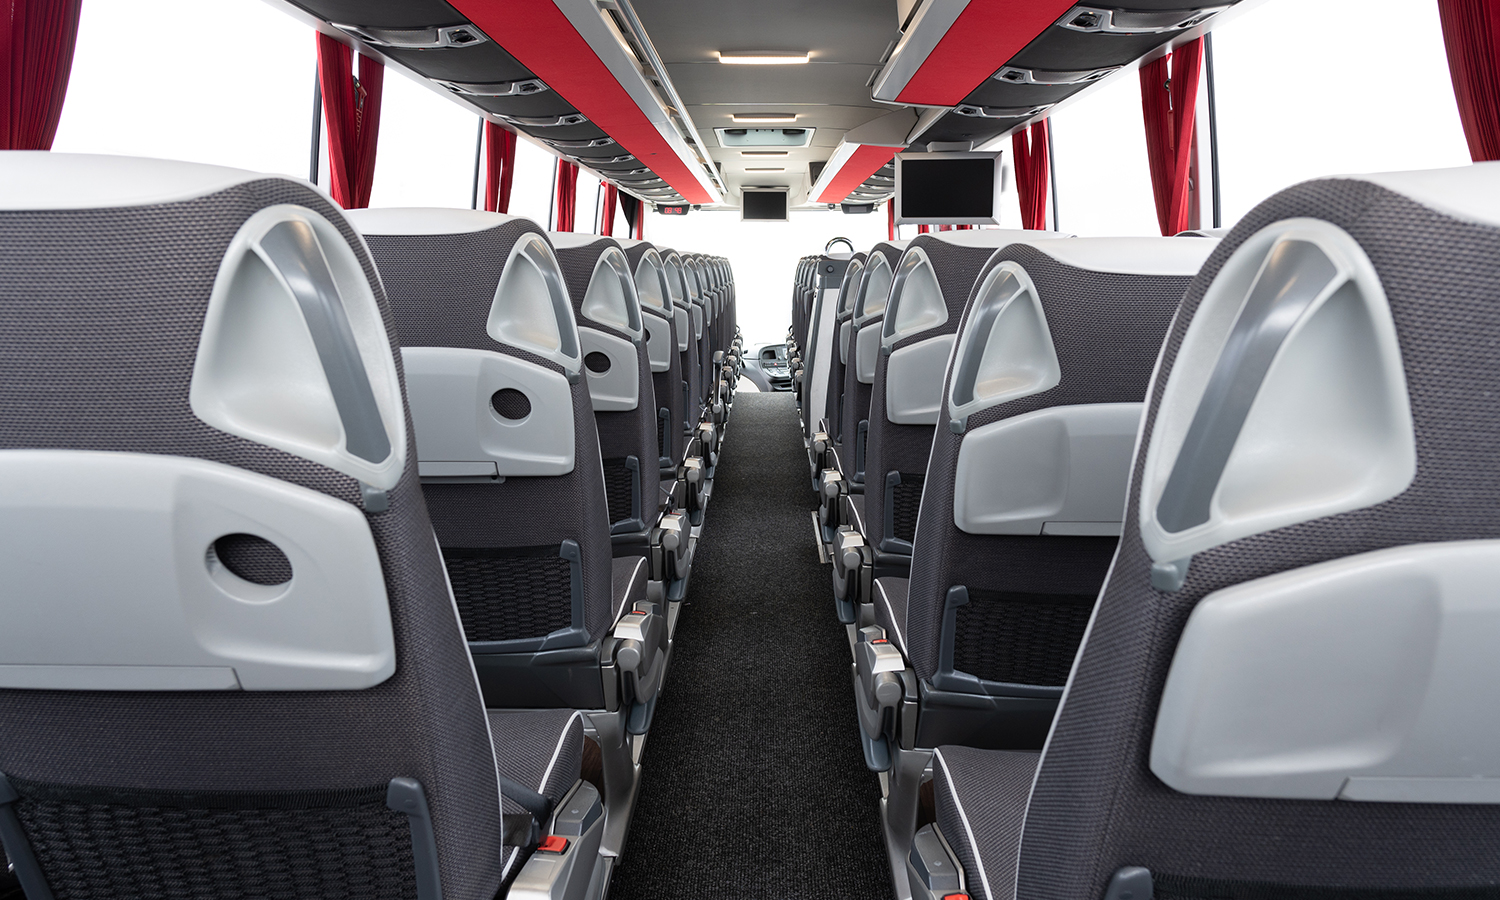 Aisle view of Luxury 53 Seater Volvo Coach